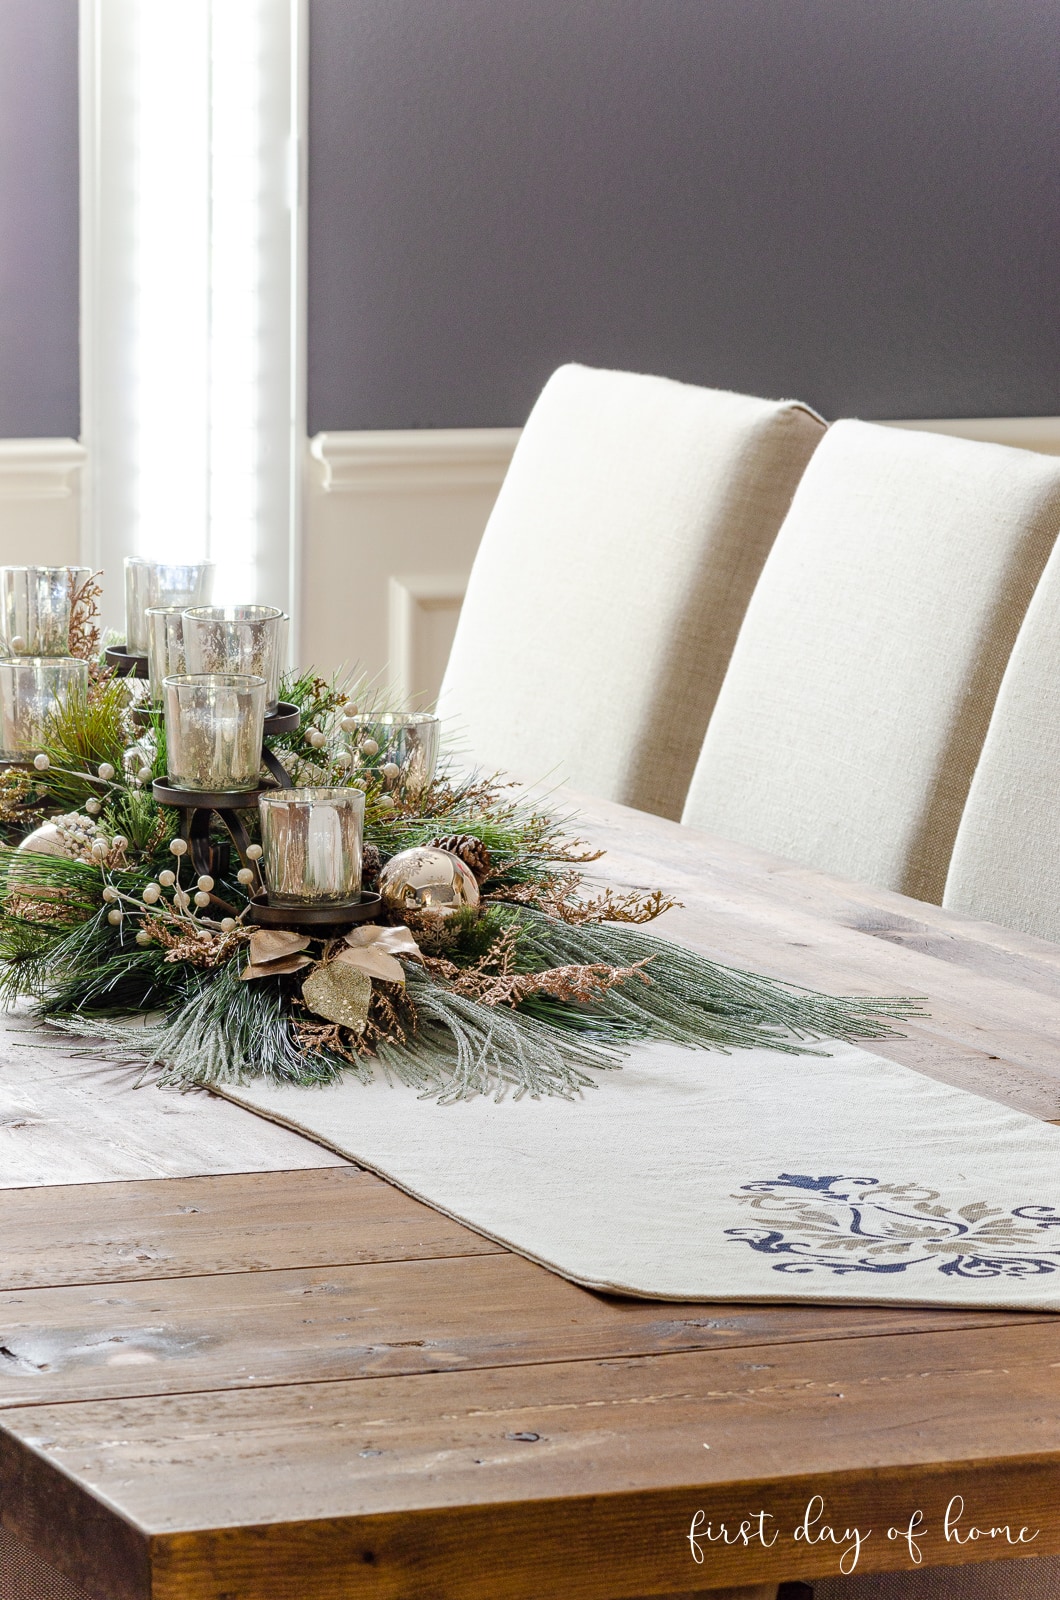 Mercury glass DIY holiday centerpiece on dining room table with table runner underneath.